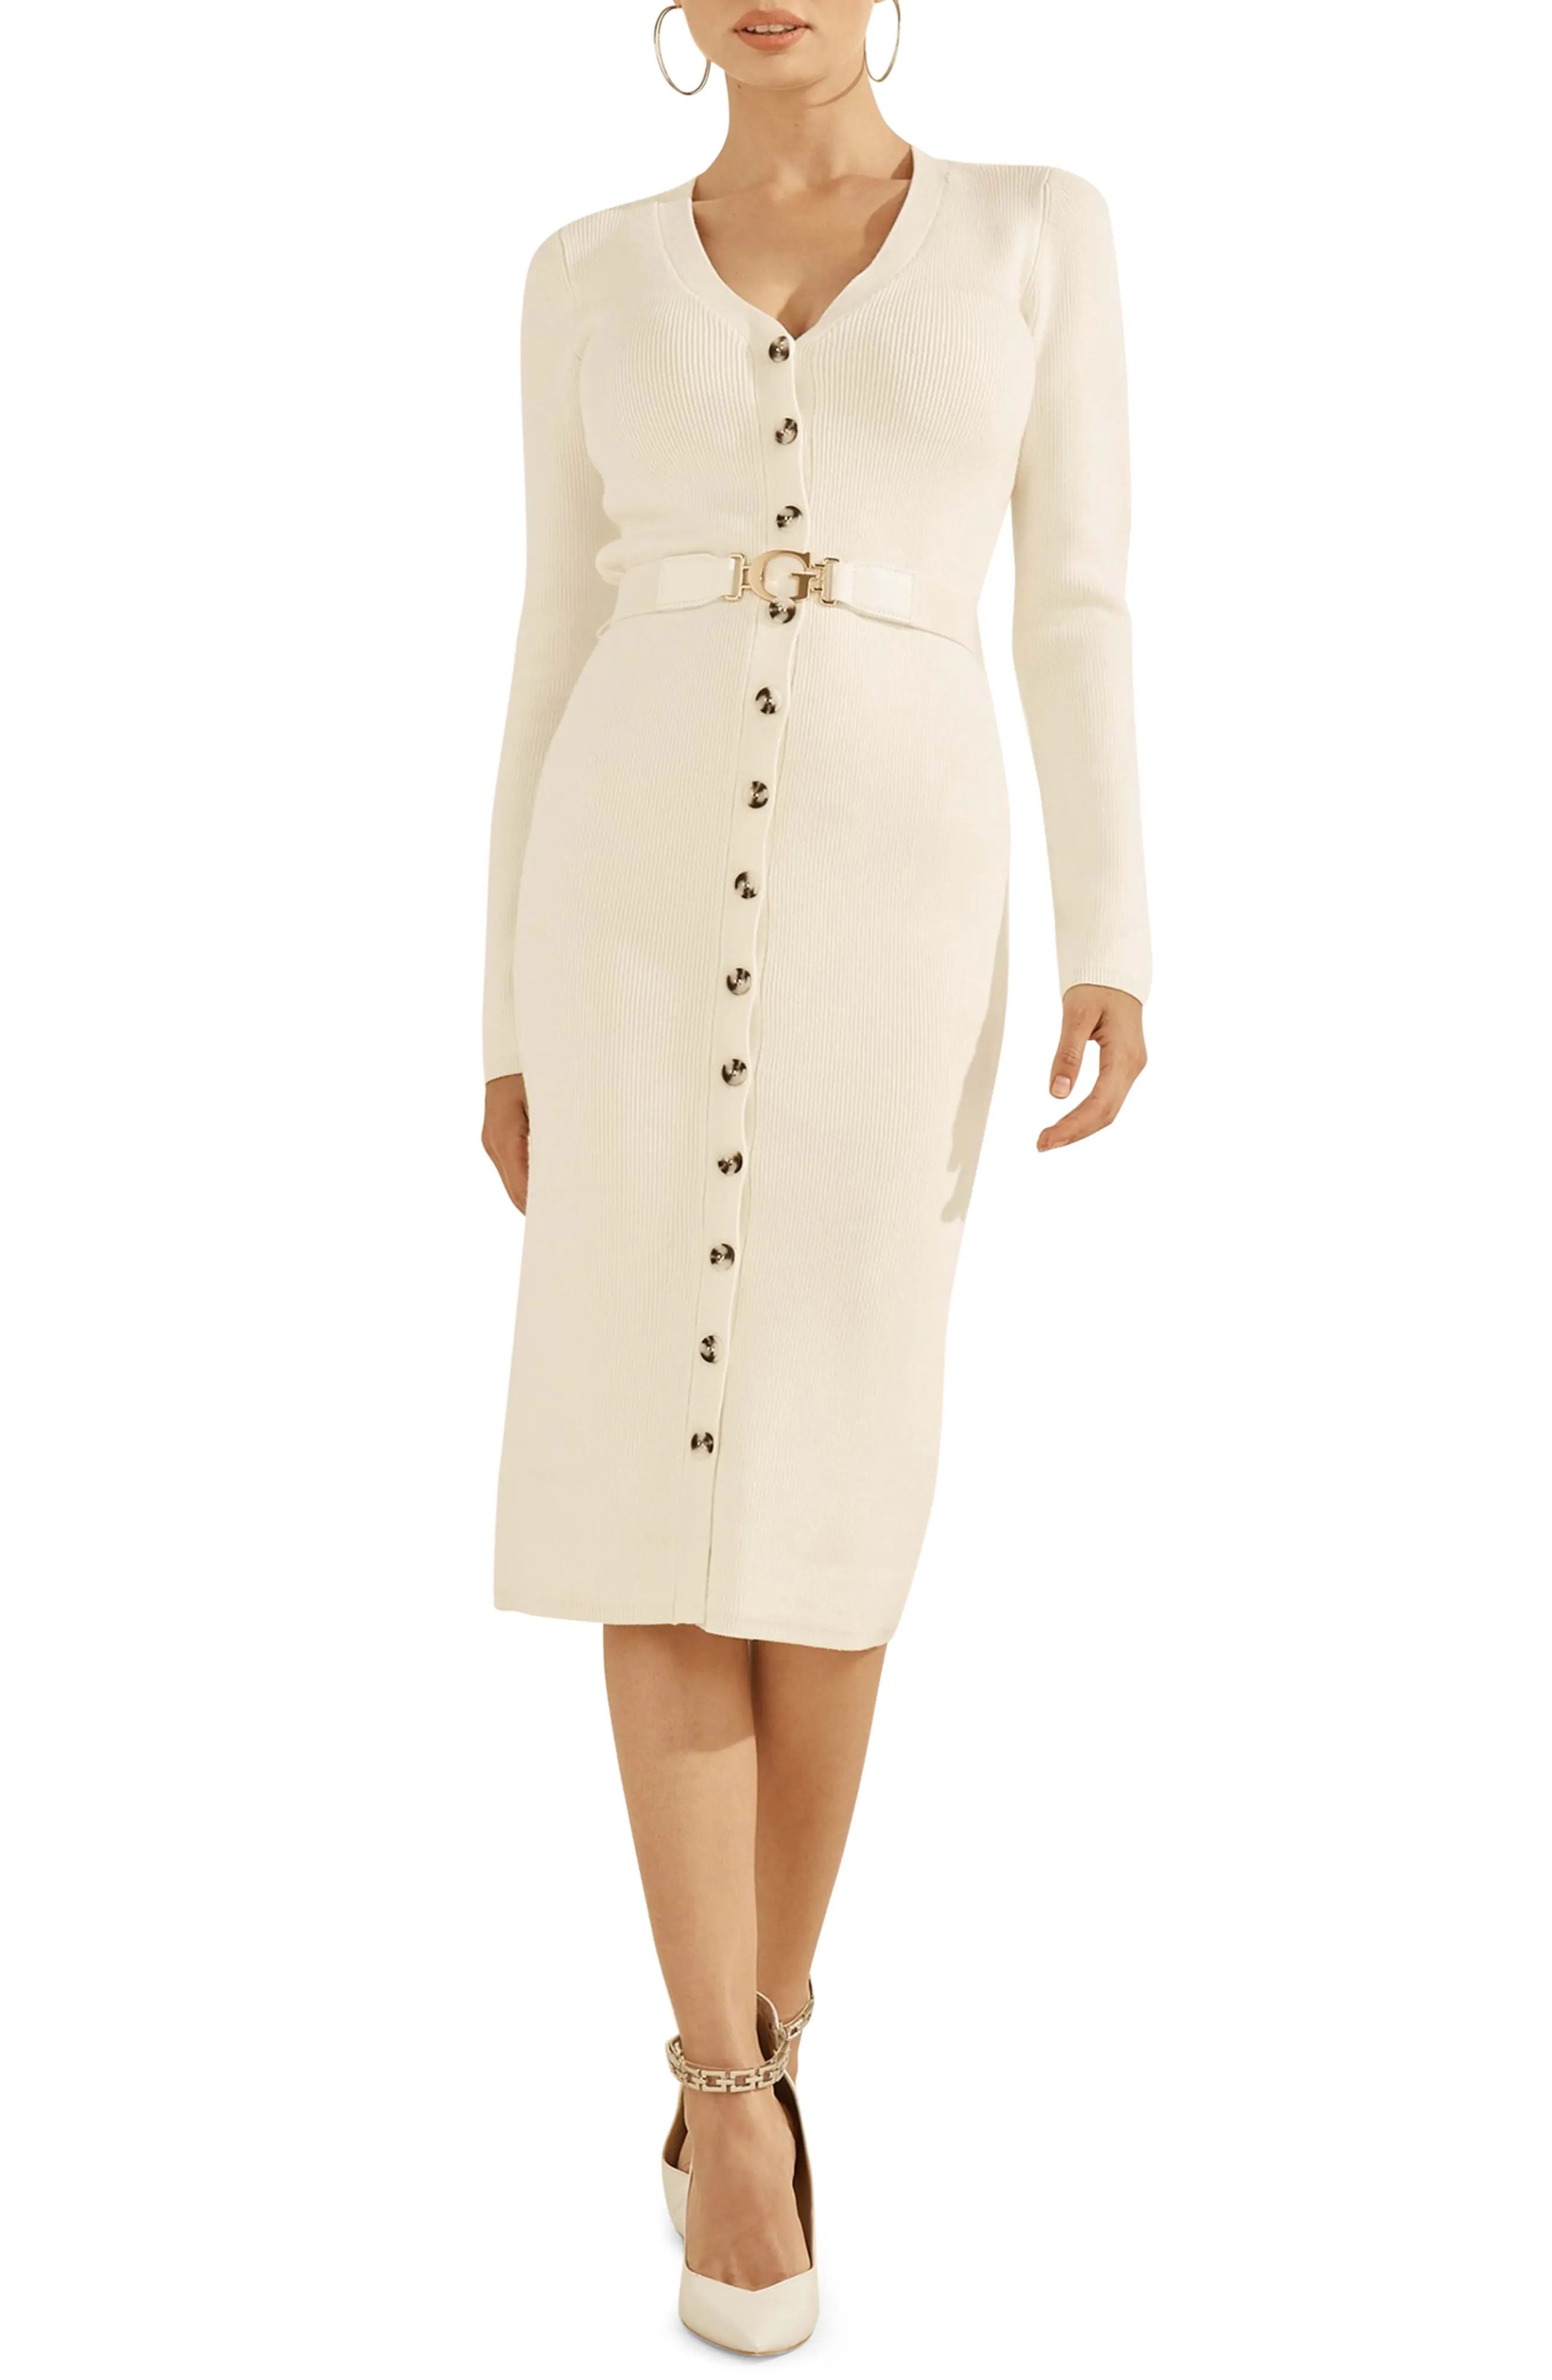 GUESS Luis Belted Long Sleeve Cardigan Dress, Size Medium in Dove White at Nordstrom | Nordstrom